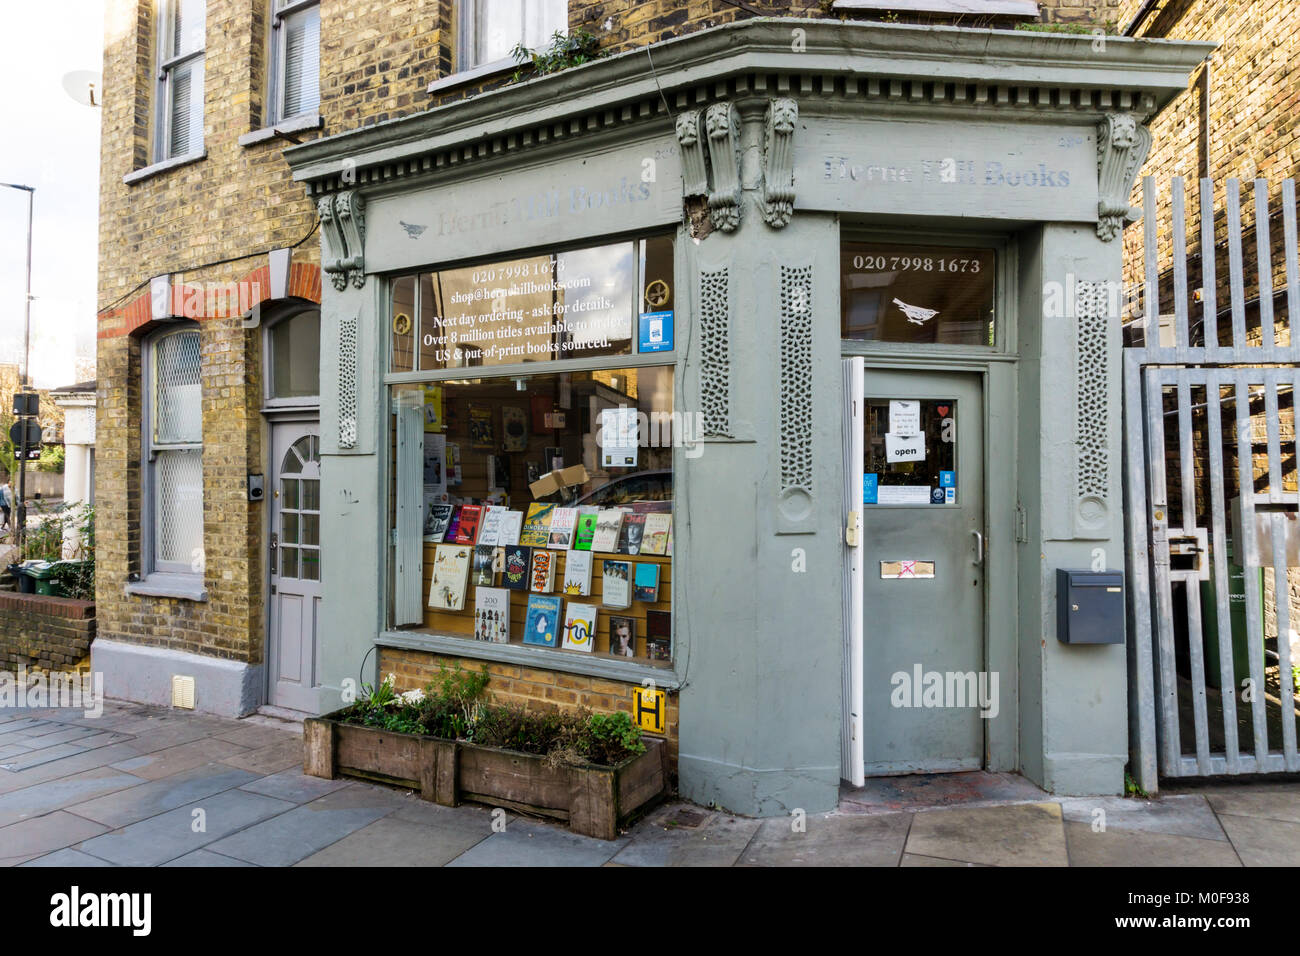 Herne Hill Books. A small, independent bookshop in Herne Hill, South London Stock Photo